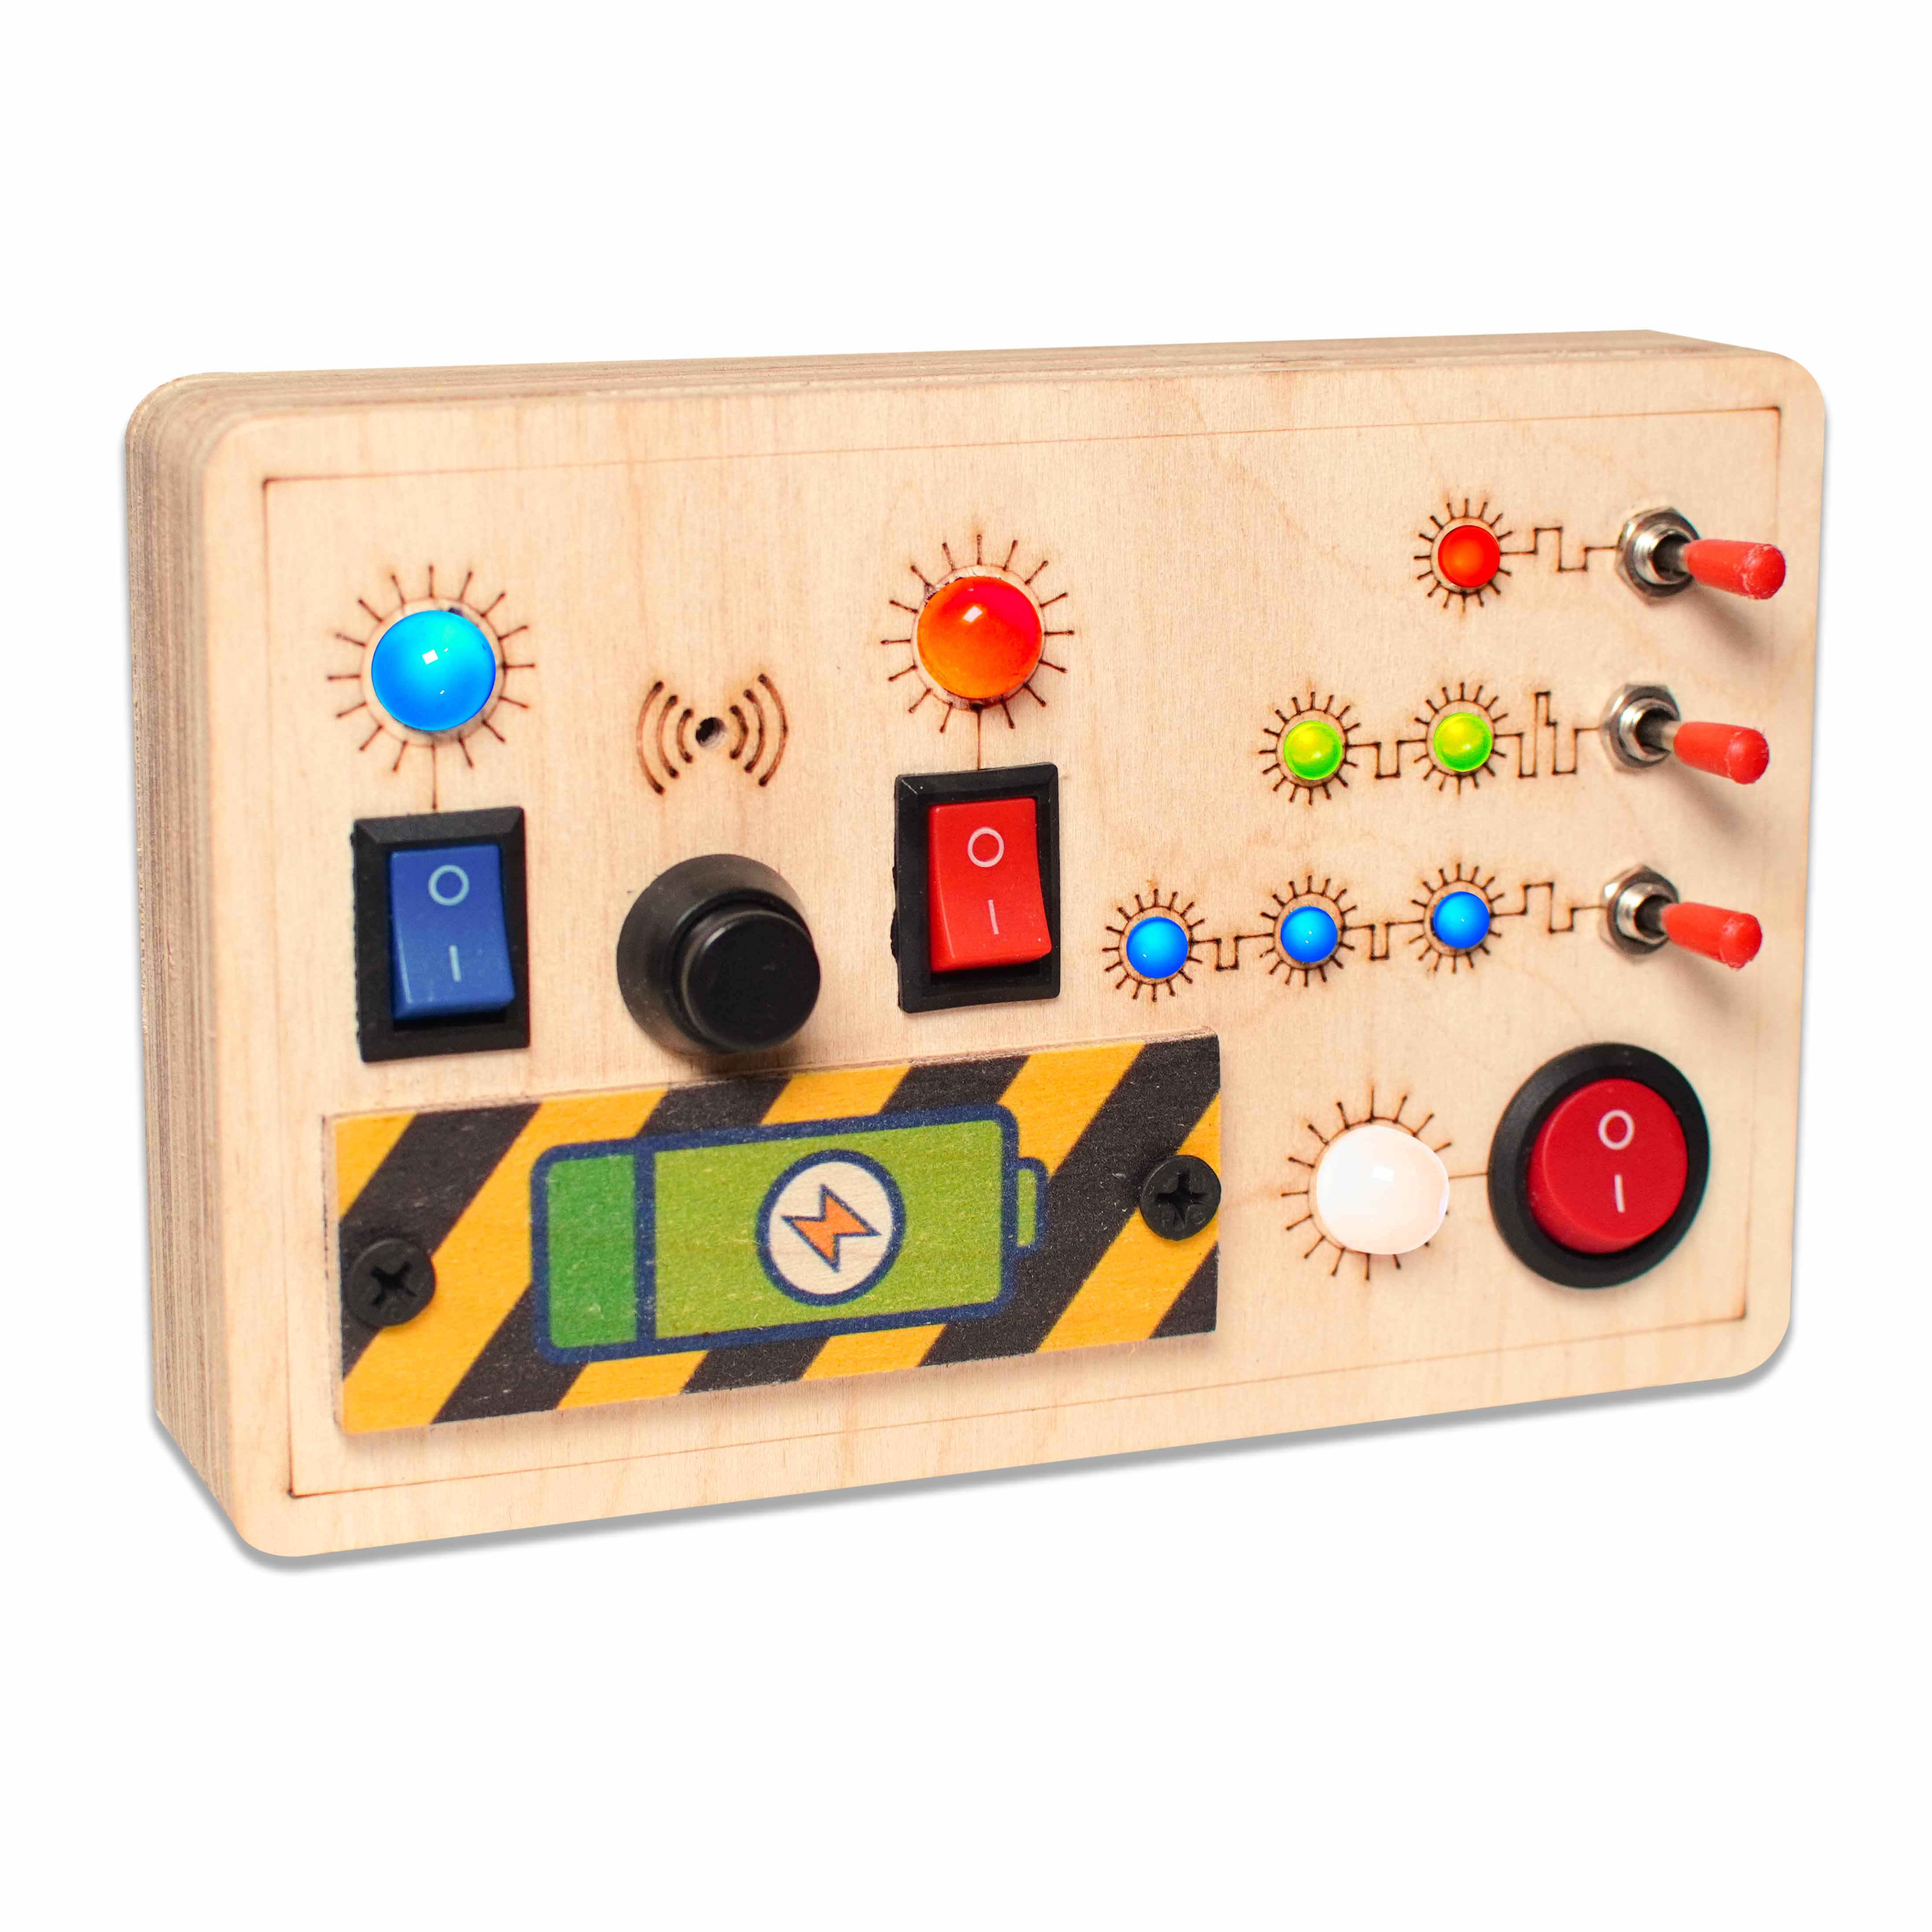 Toddler Montessori Portable Switches Wooden Busy Board With 3 Toggle, 1 Buzzer Module V6